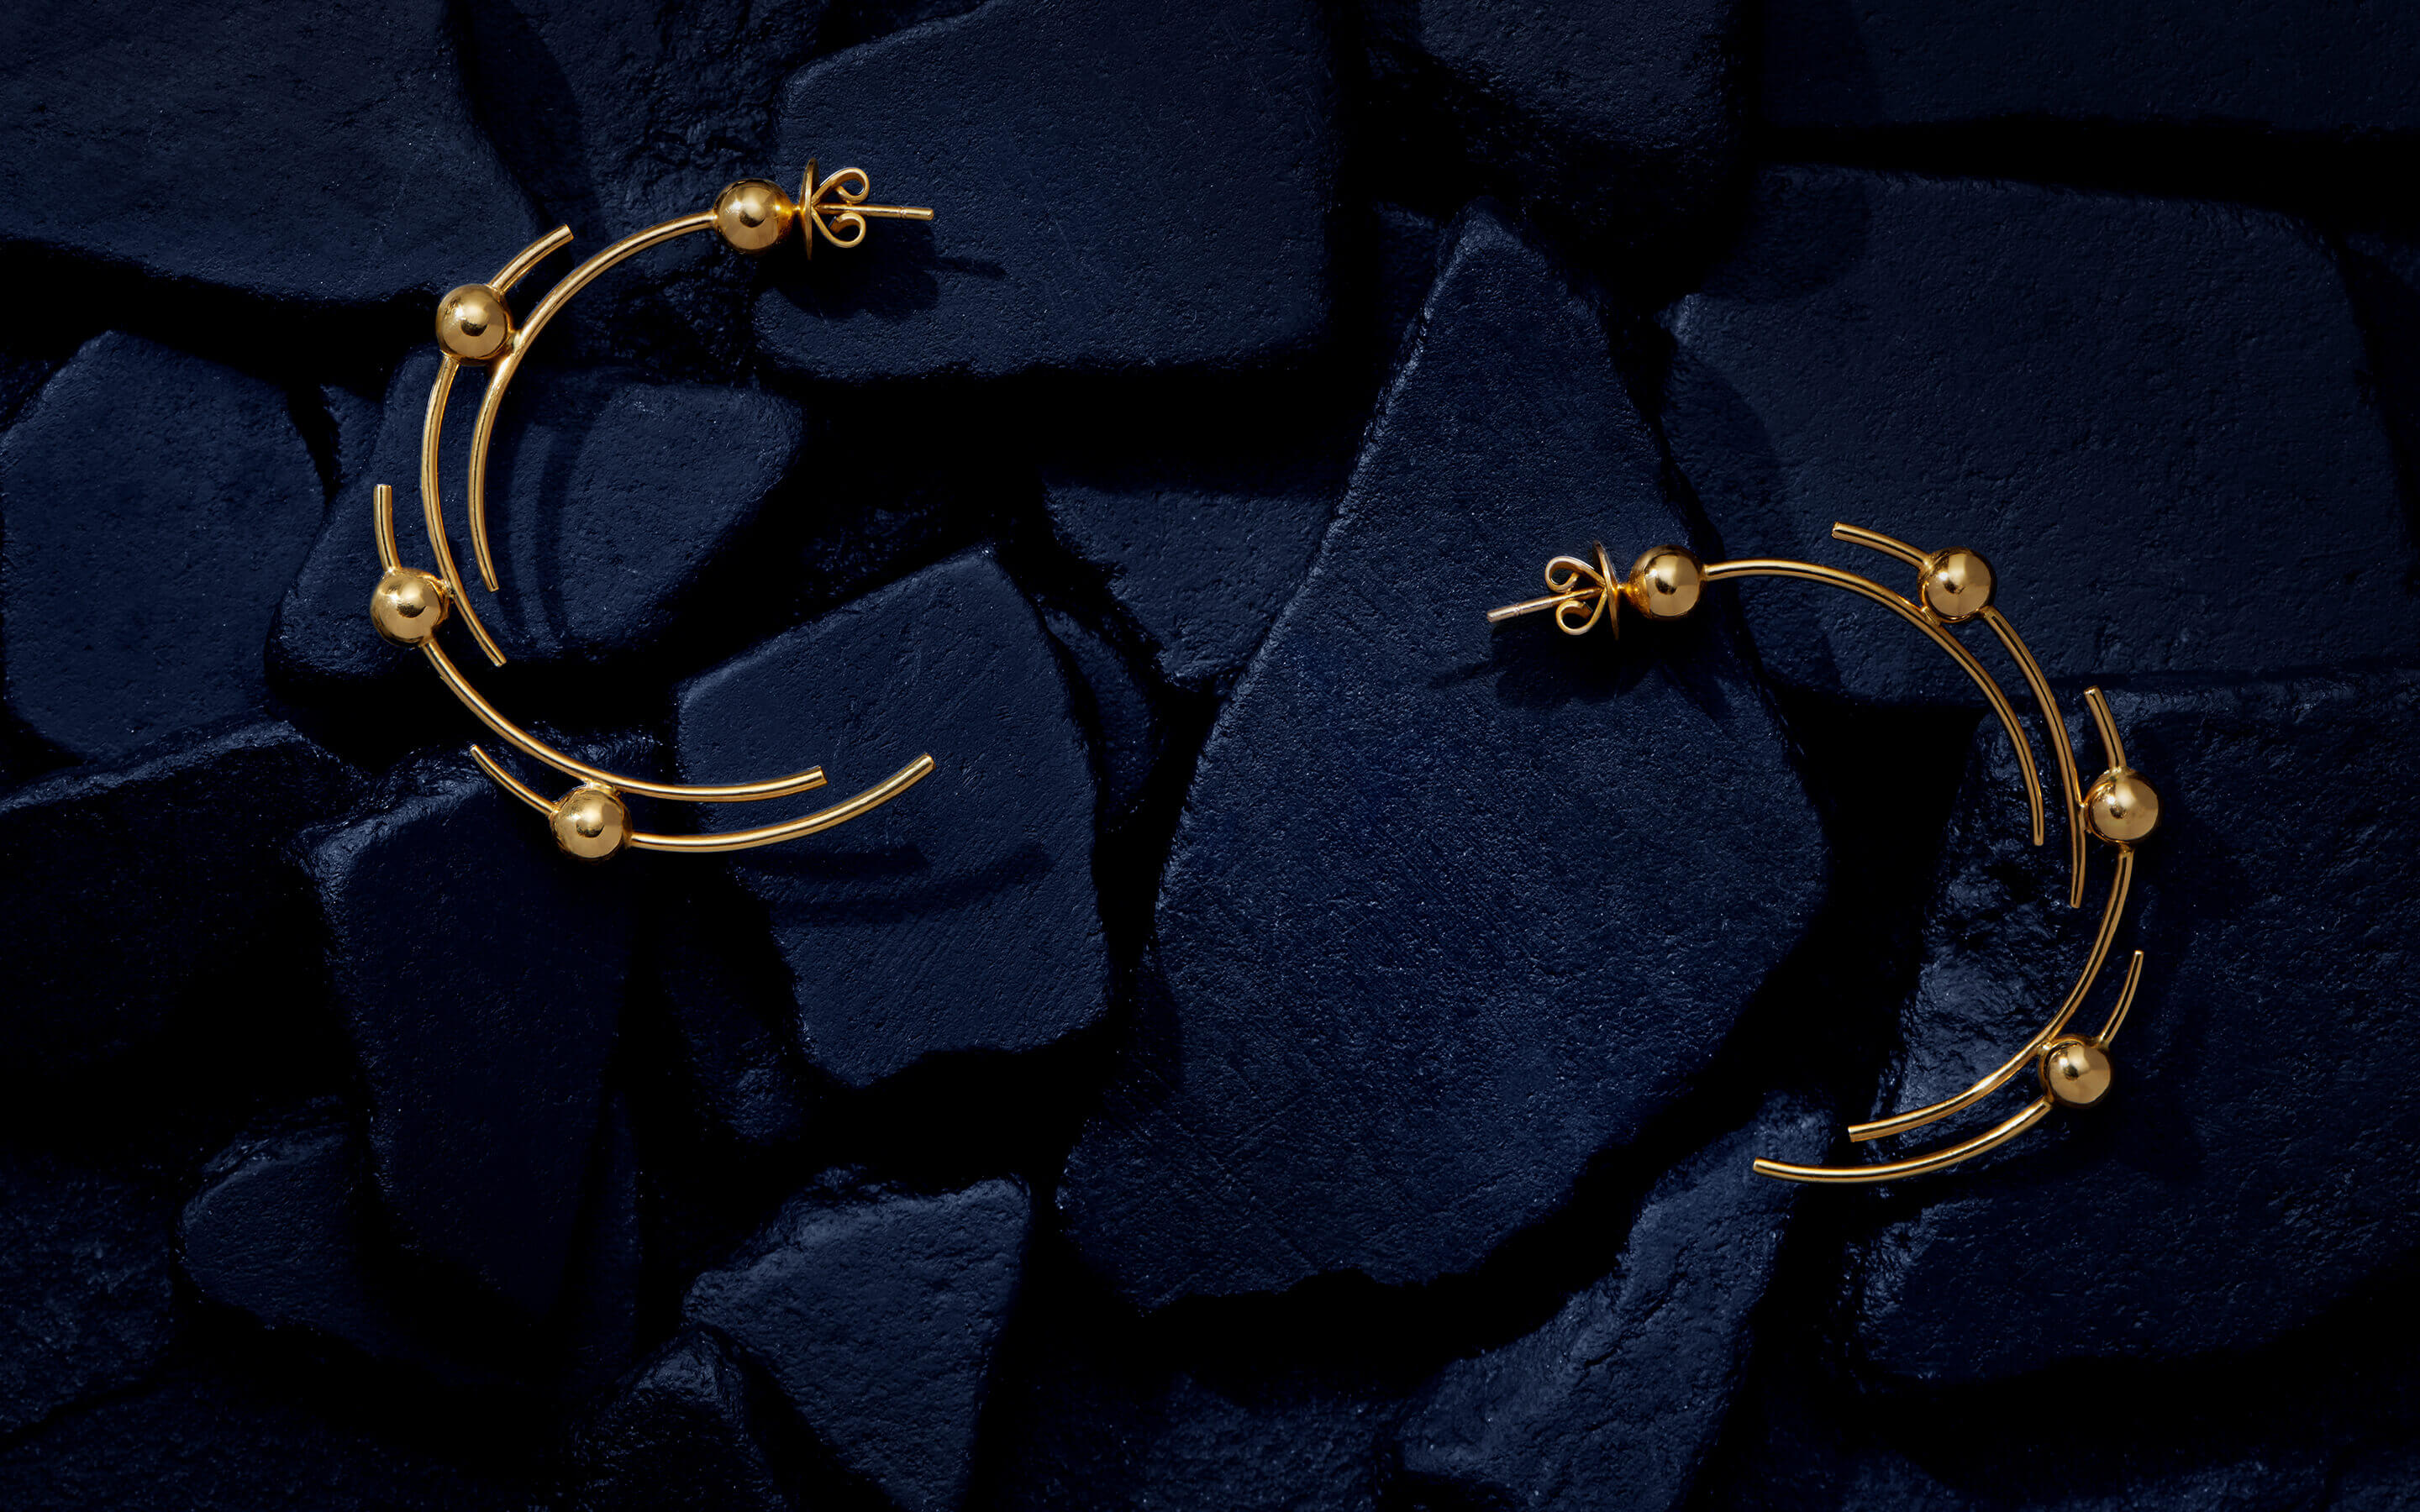 Auvere 22 and 24 karat gold jewelry from the Cosmic Gold campaign